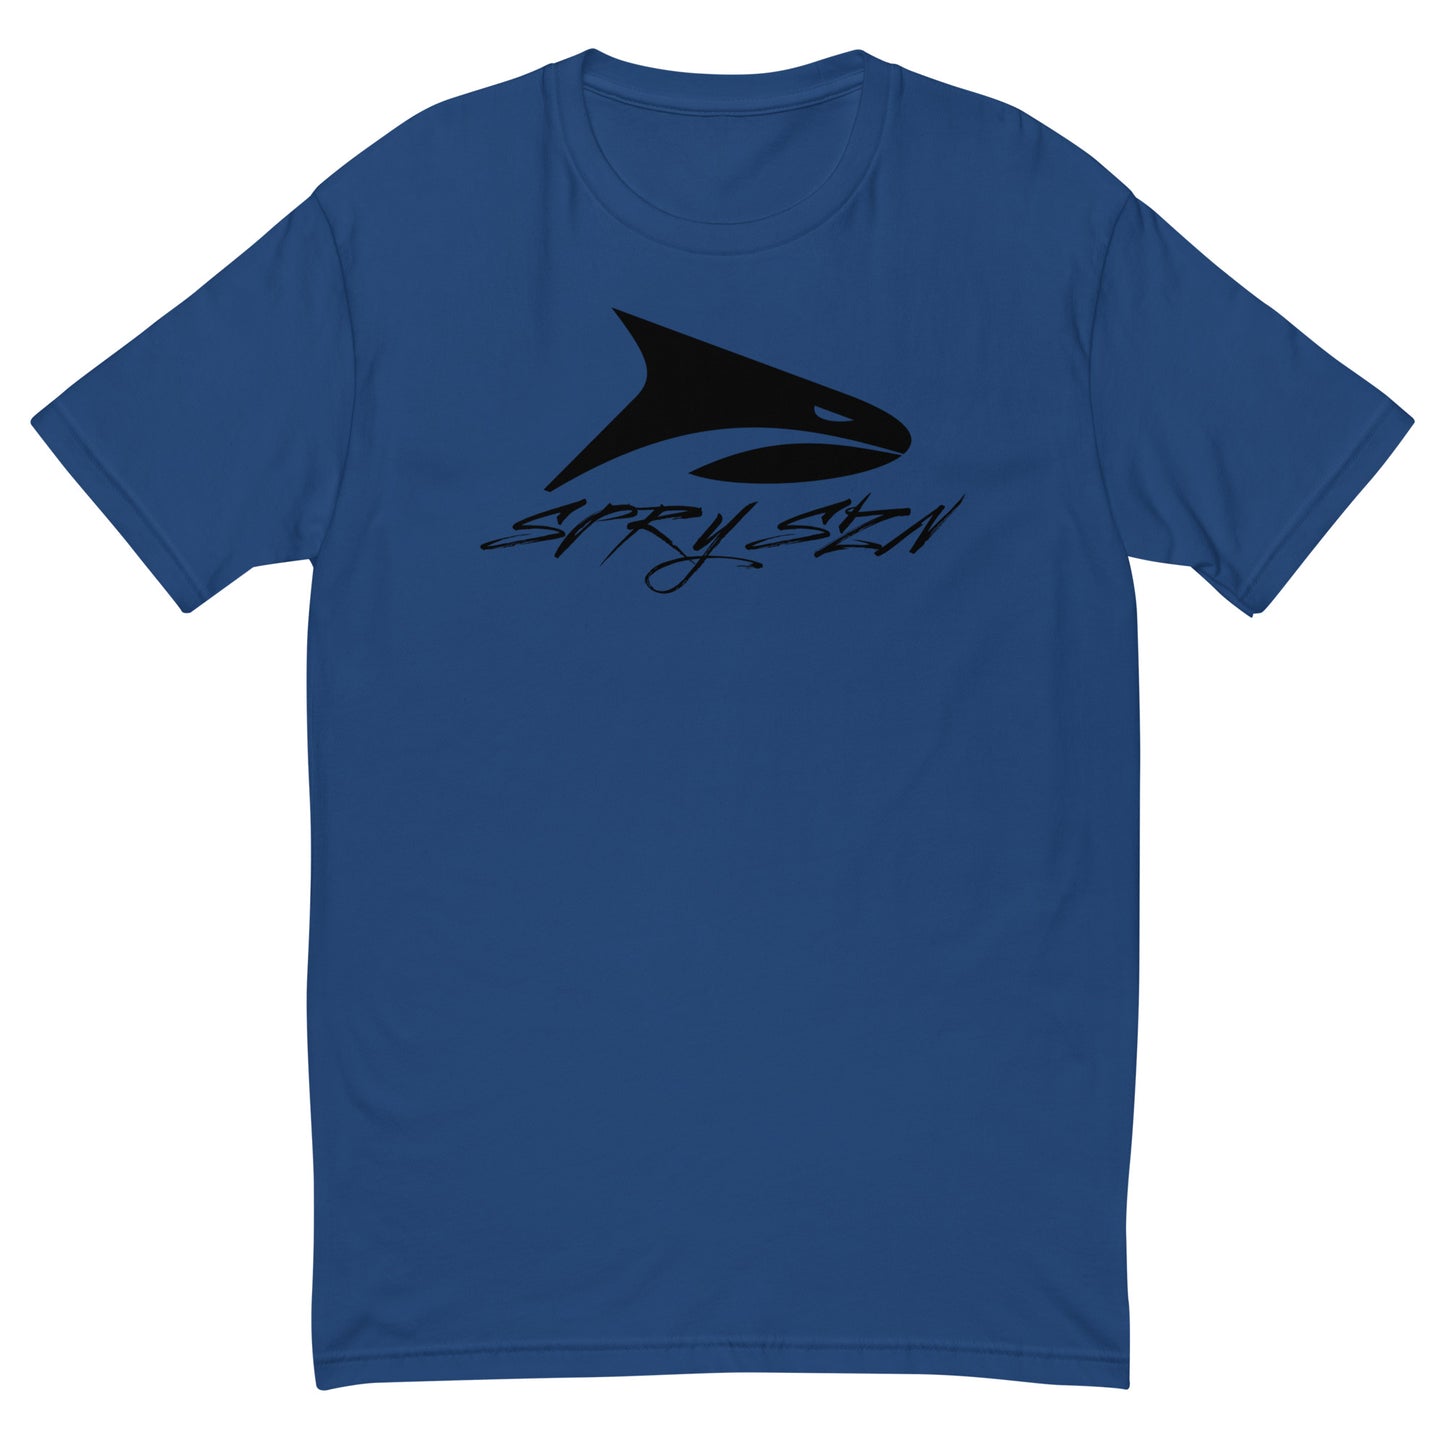 LEGACY Fitted T - Black Shark